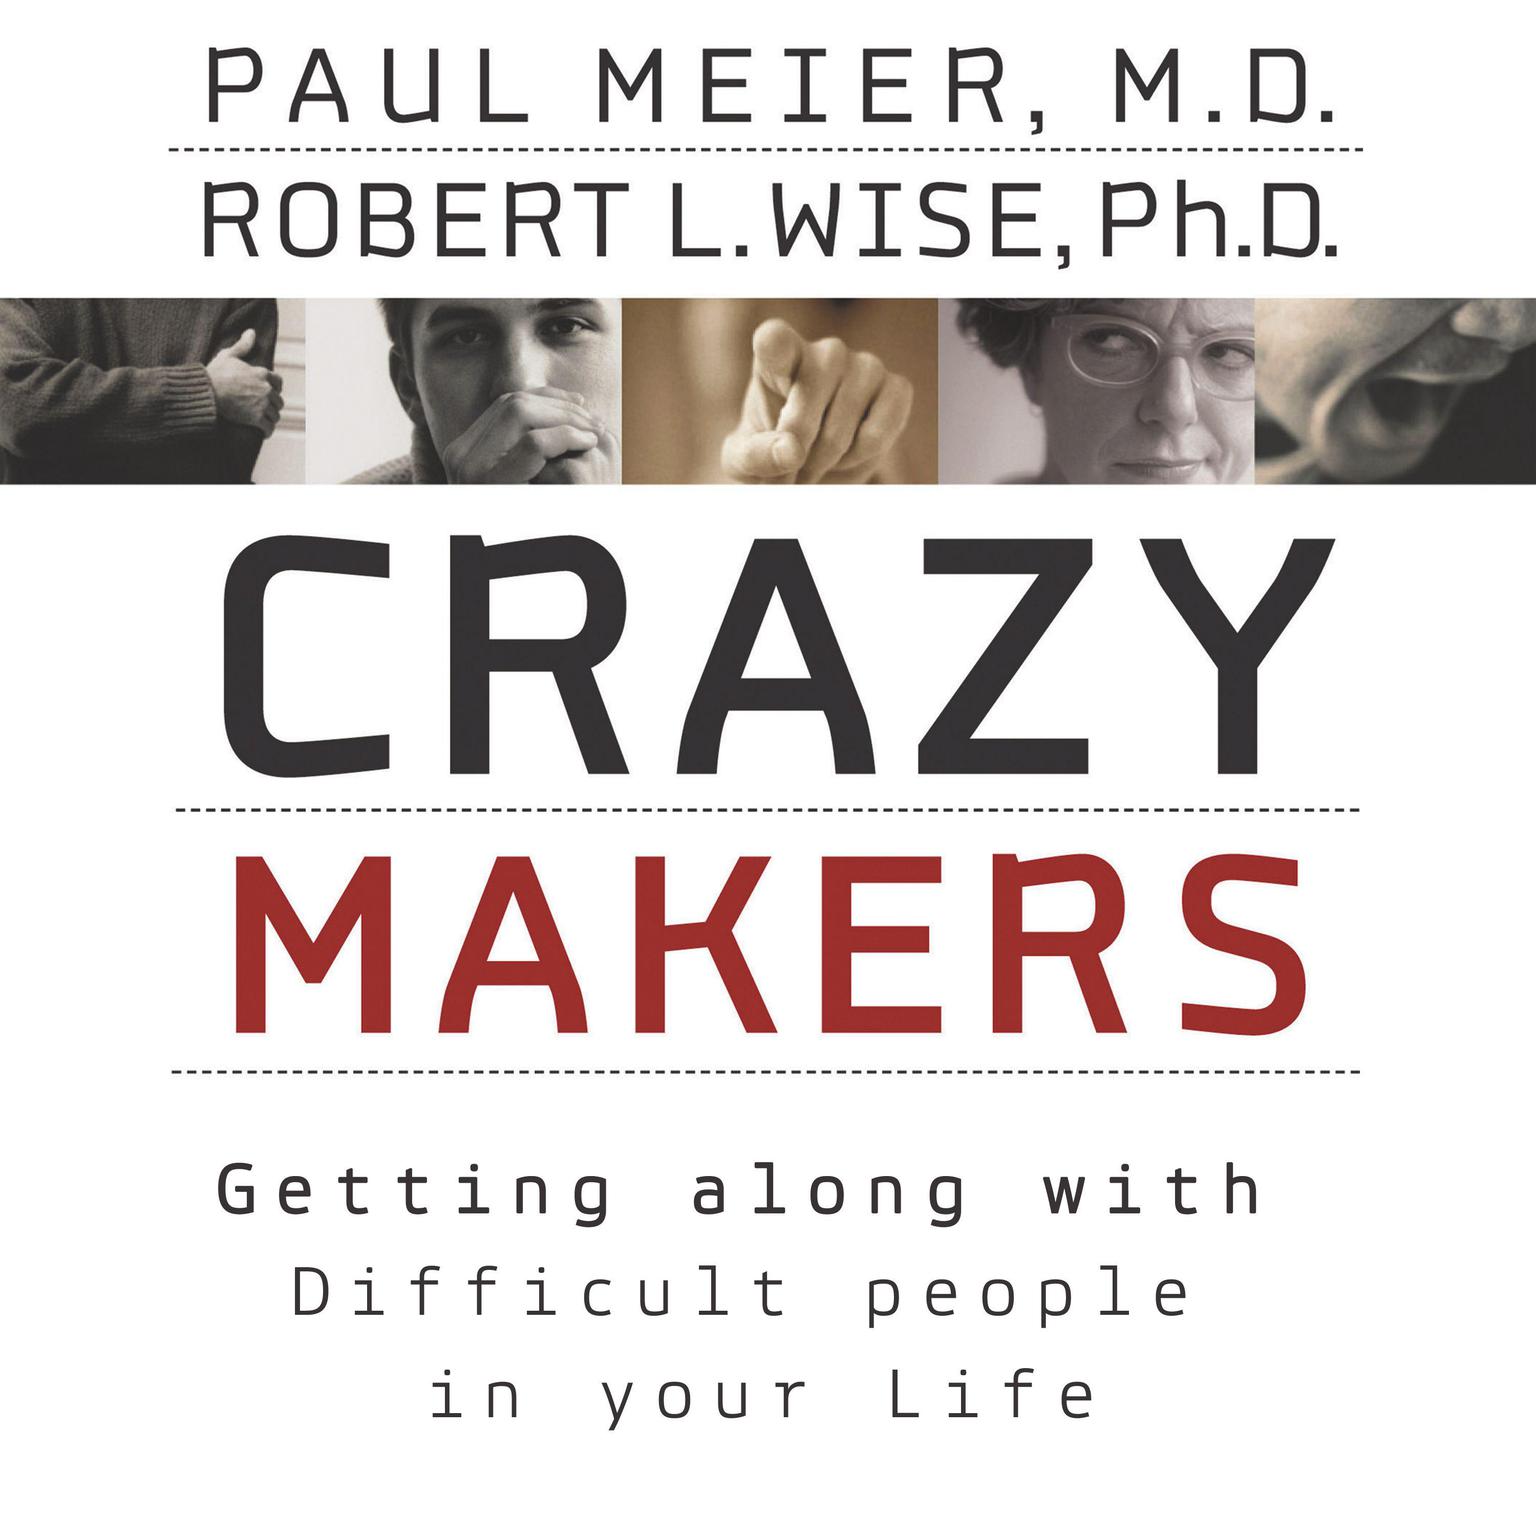 Crazymakers: Getting along with Difficult people in your Life Audiobook, by Paul Meier